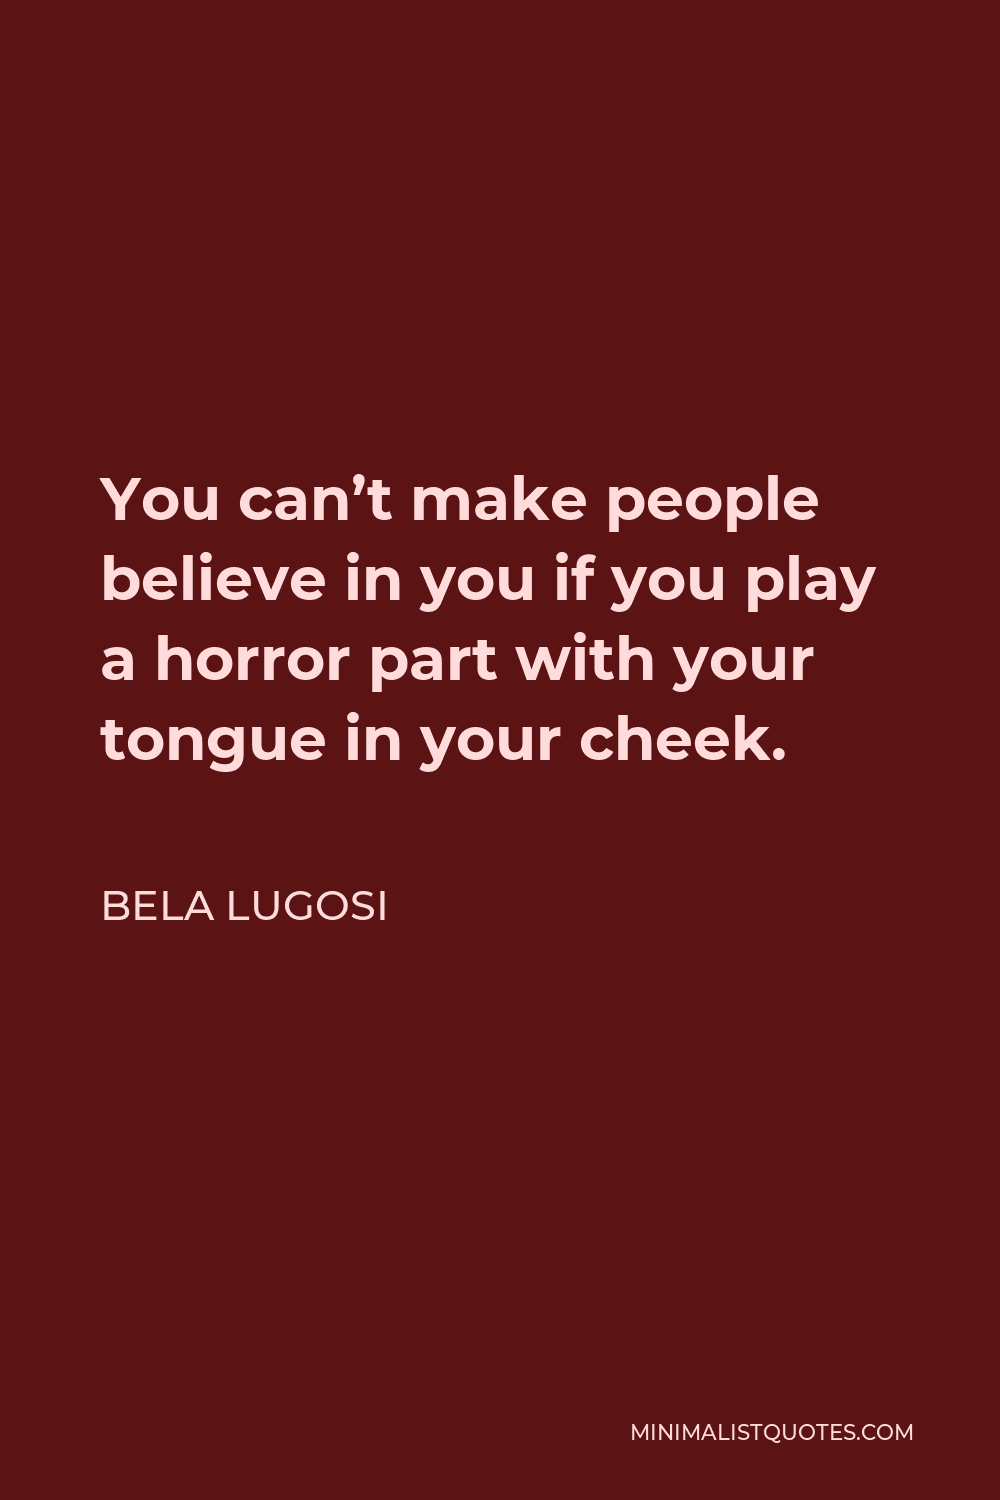 Bela Lugosi Quote - You can’t make people believe in you if you play a horror part with your tongue in your cheek.